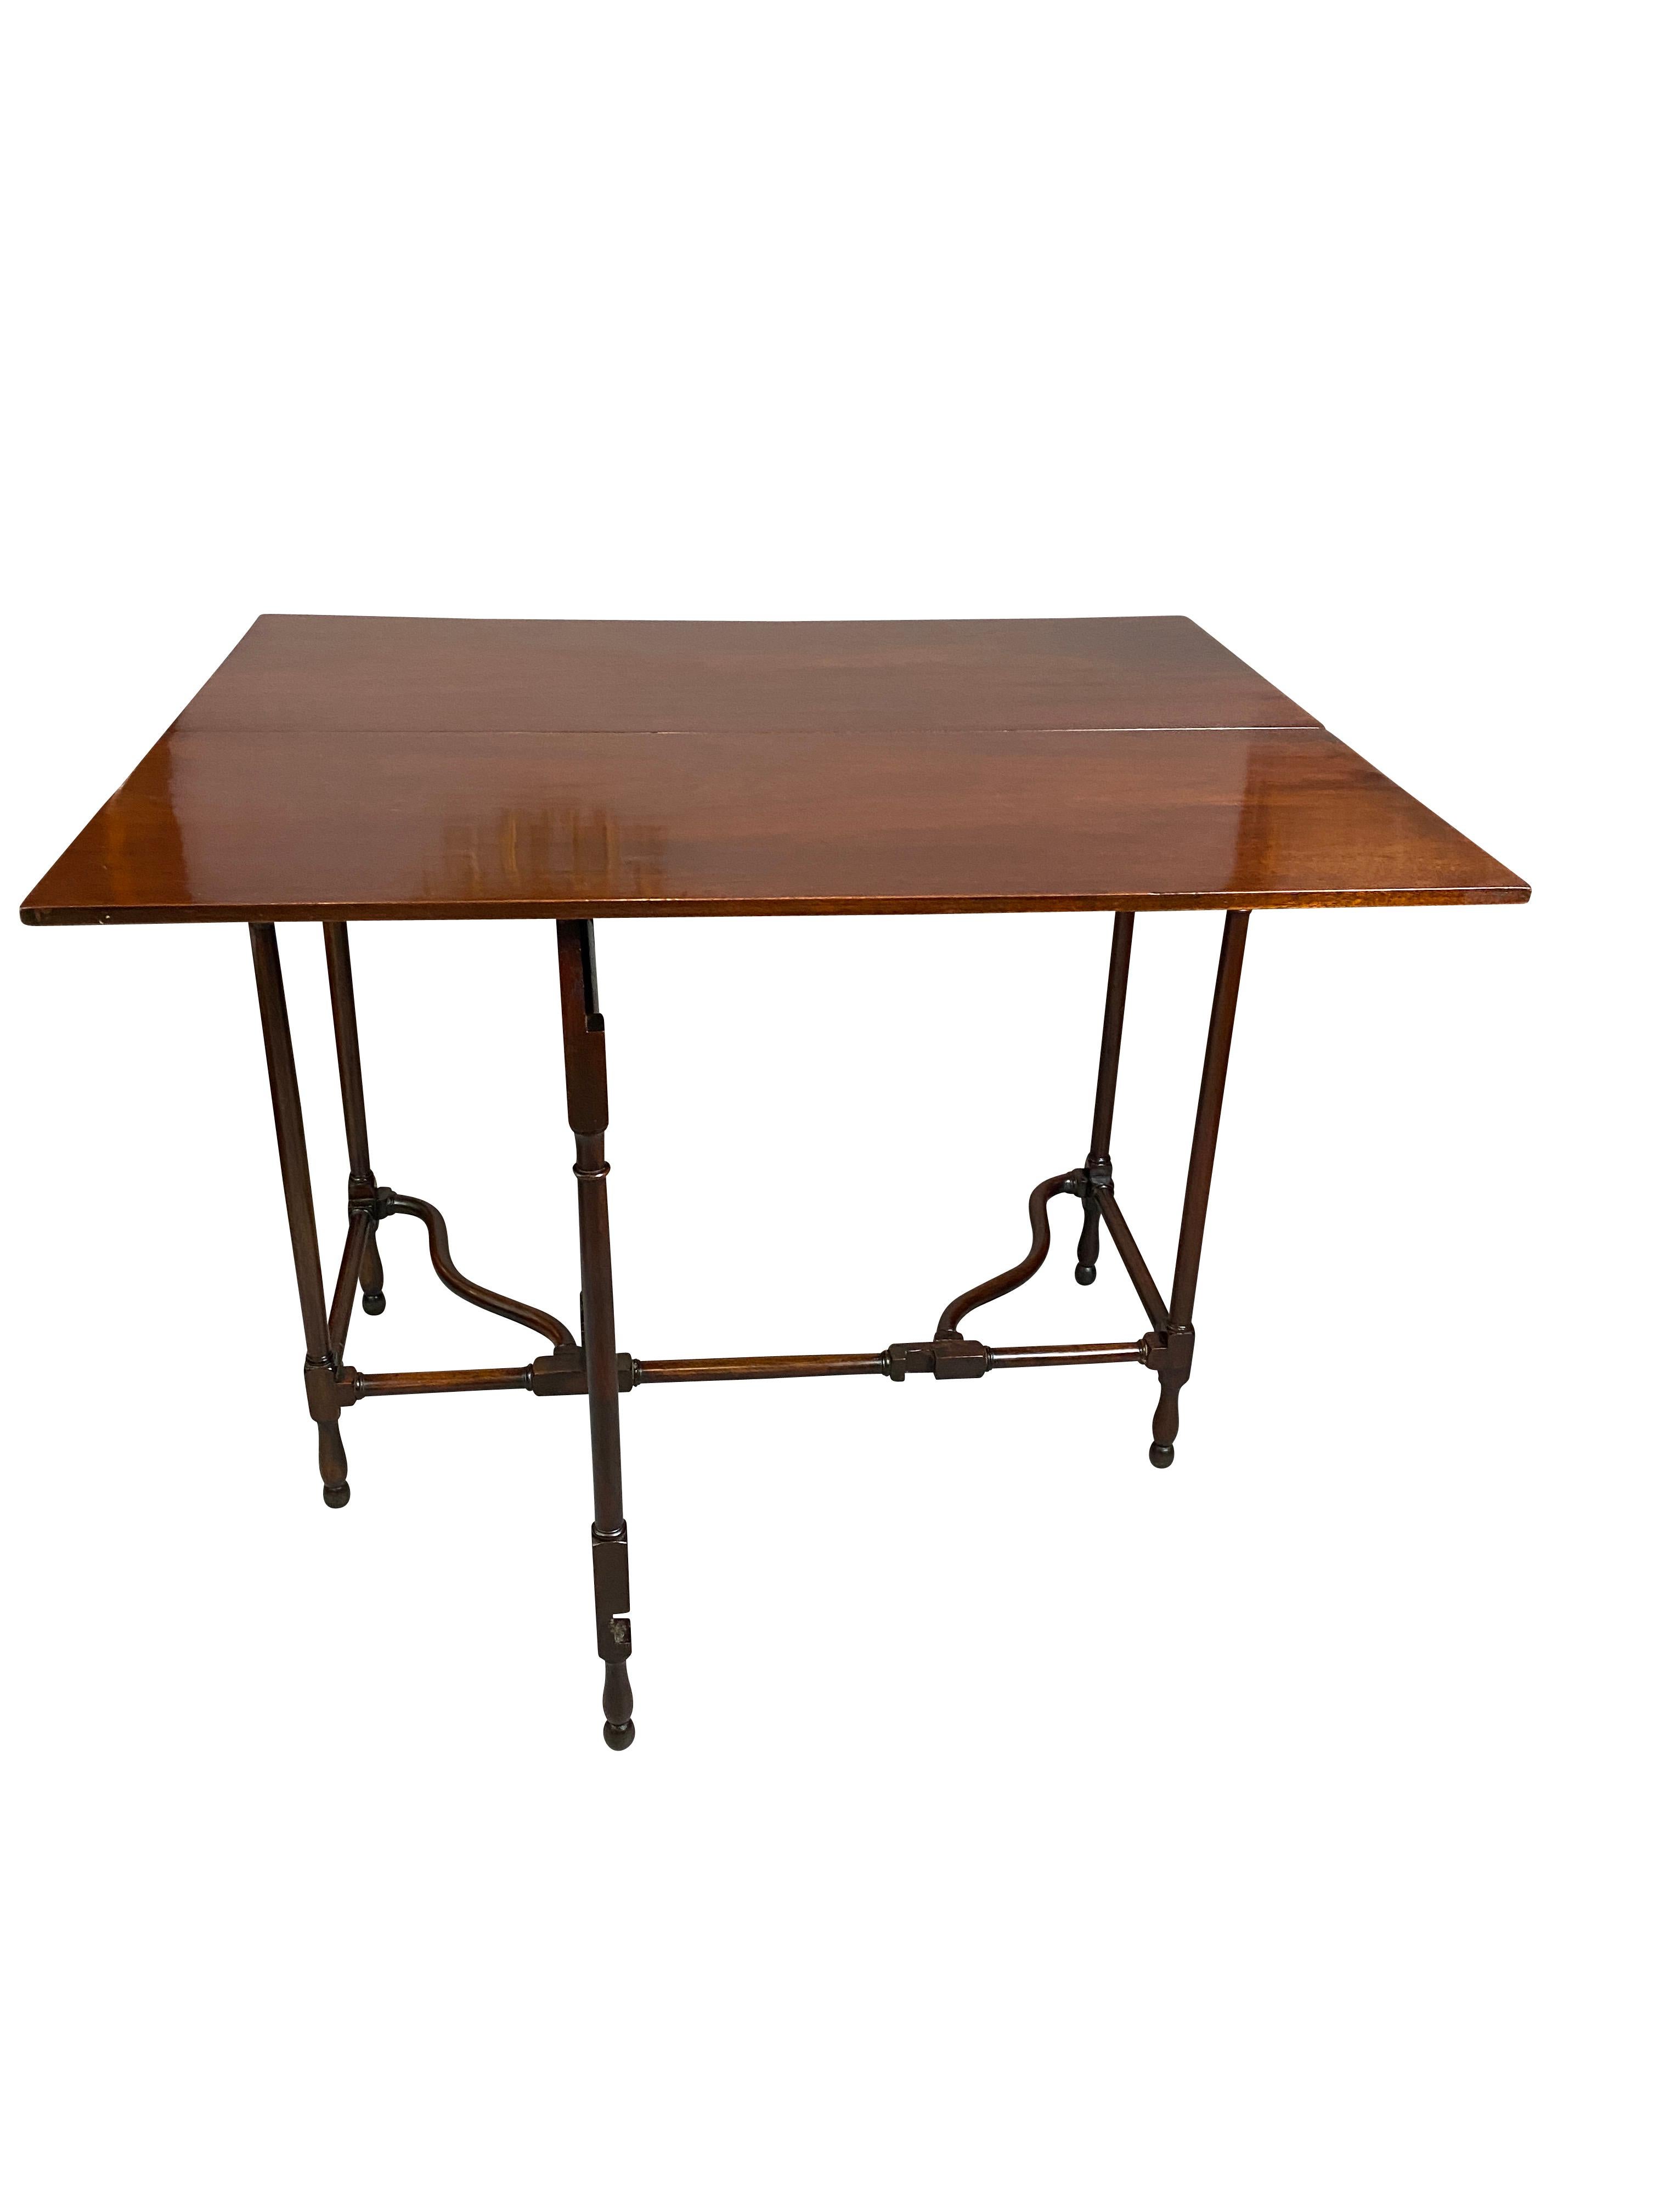 Late 18th Century Fine George III Mahogany Spider Leg Table For Sale